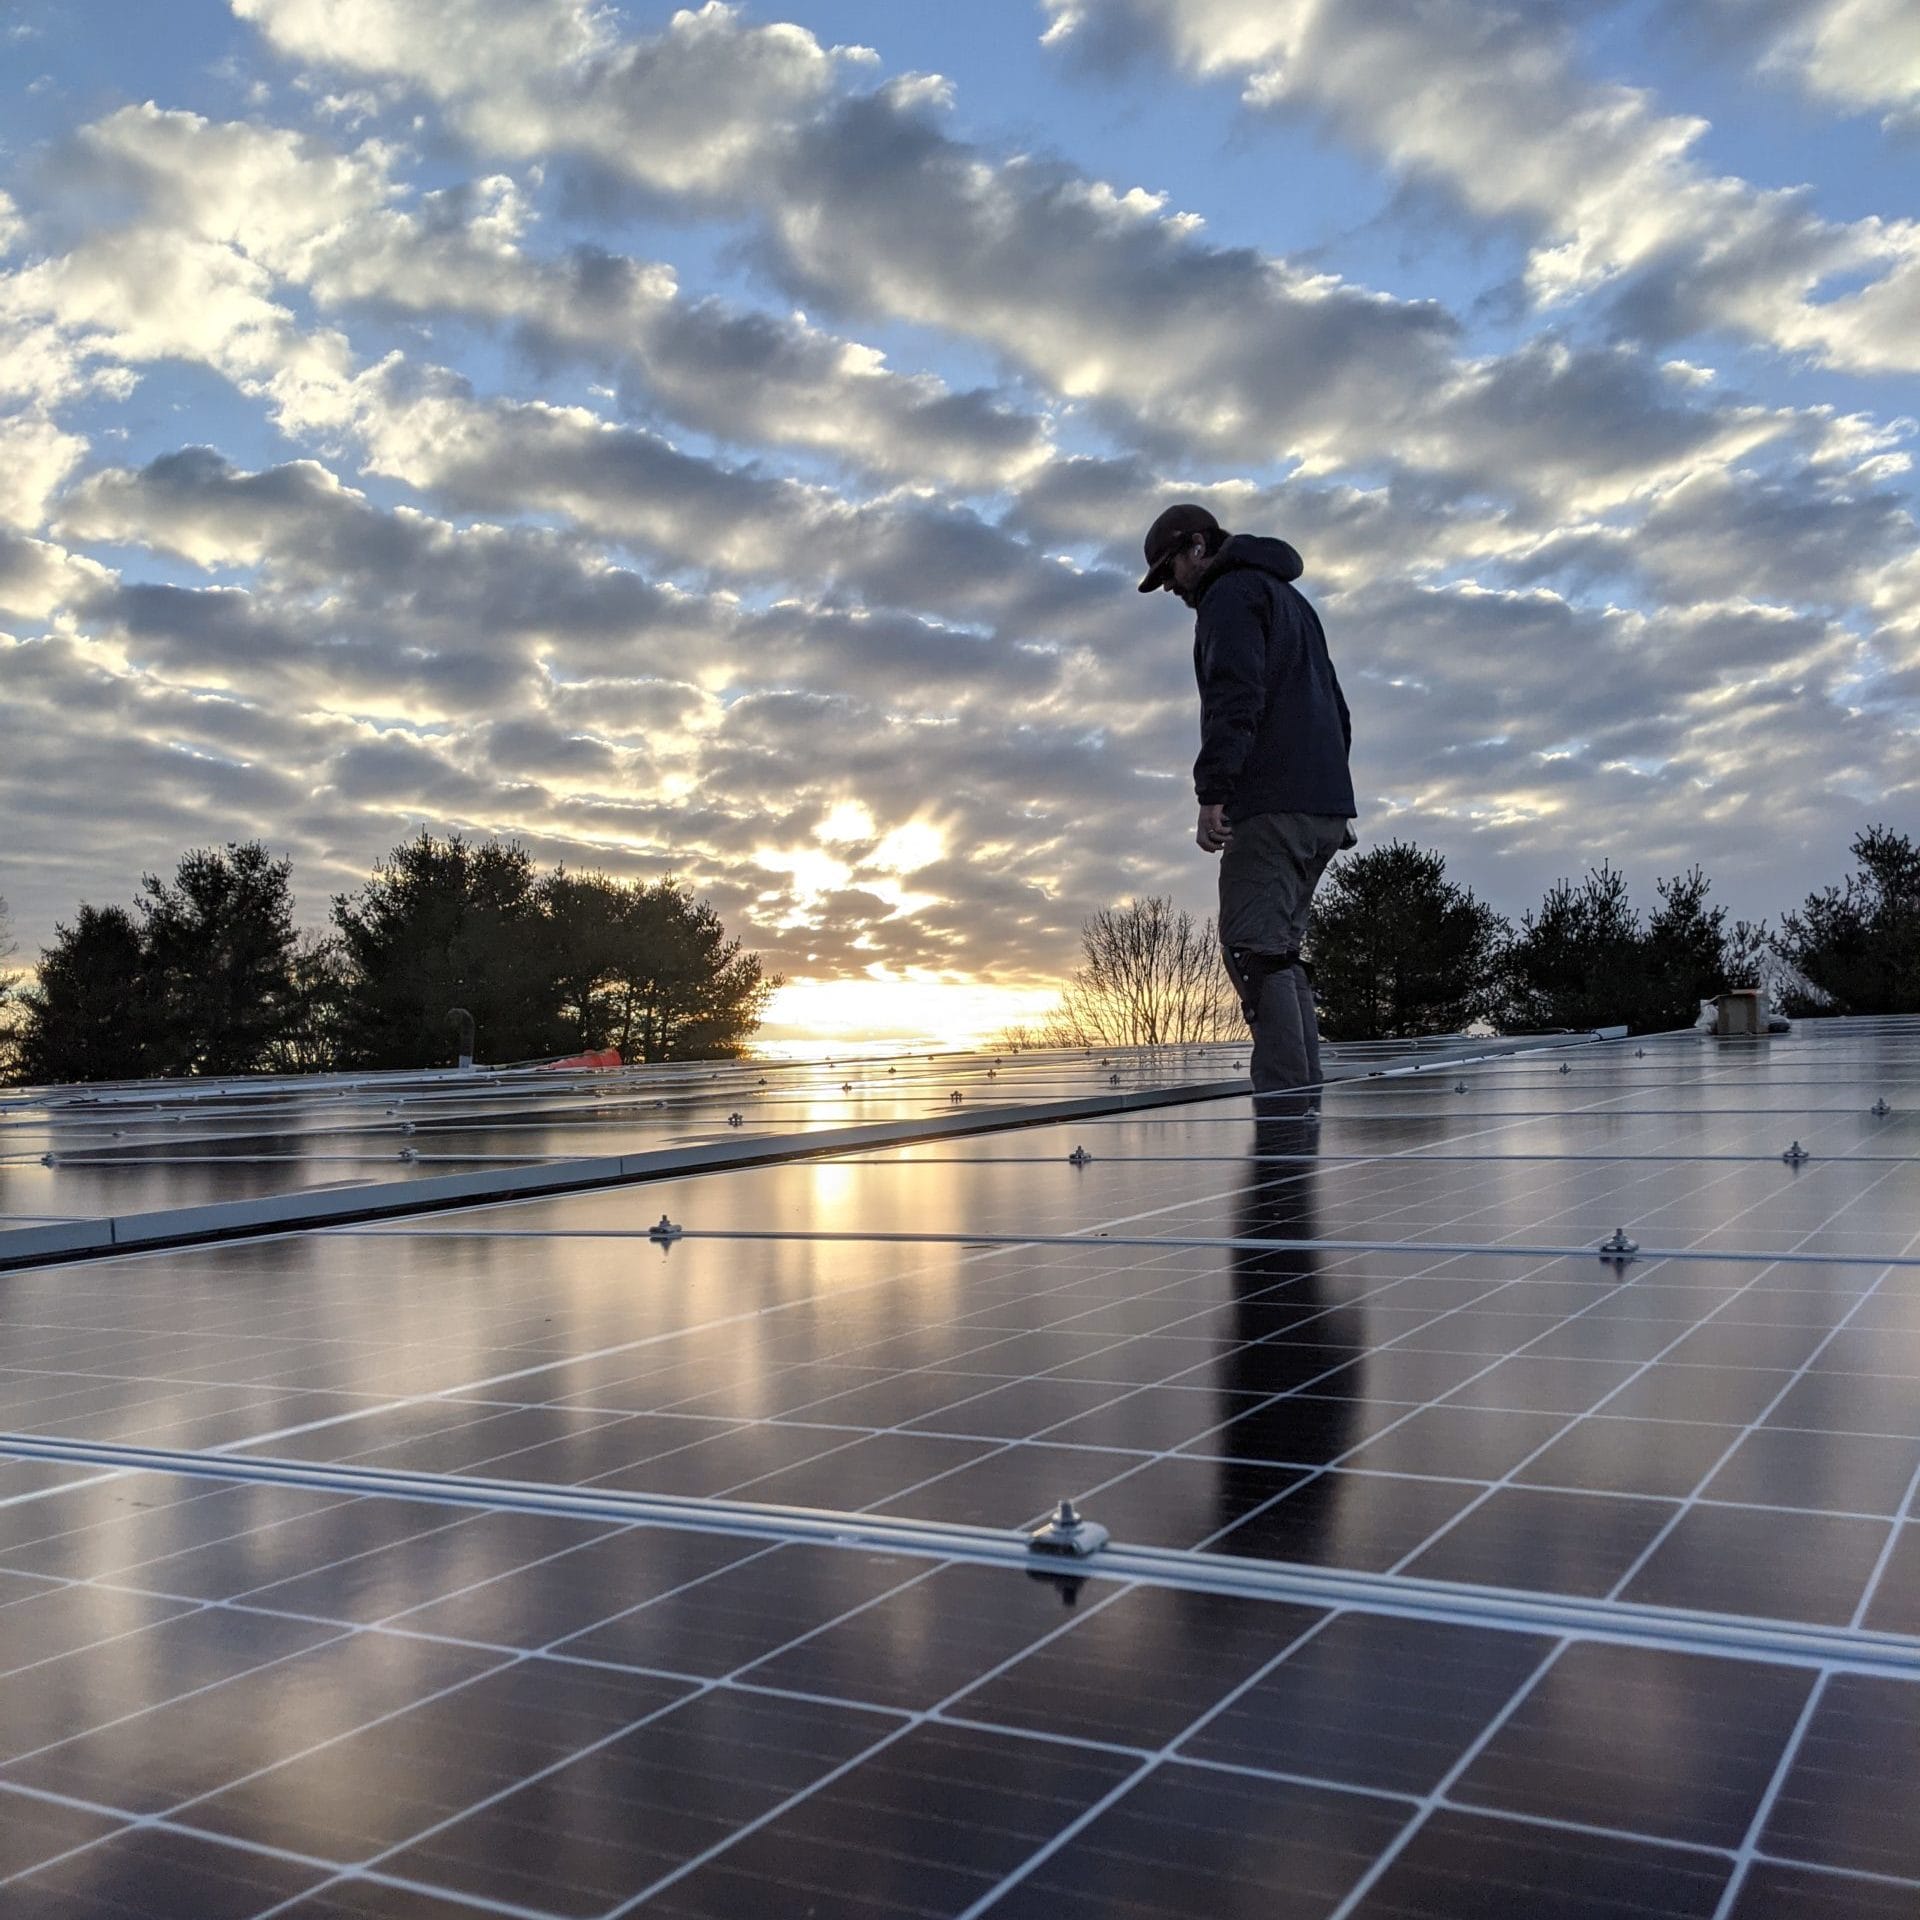 Solar energy growth is exponential again – up 28%, 3.2% of all electricity in 2020